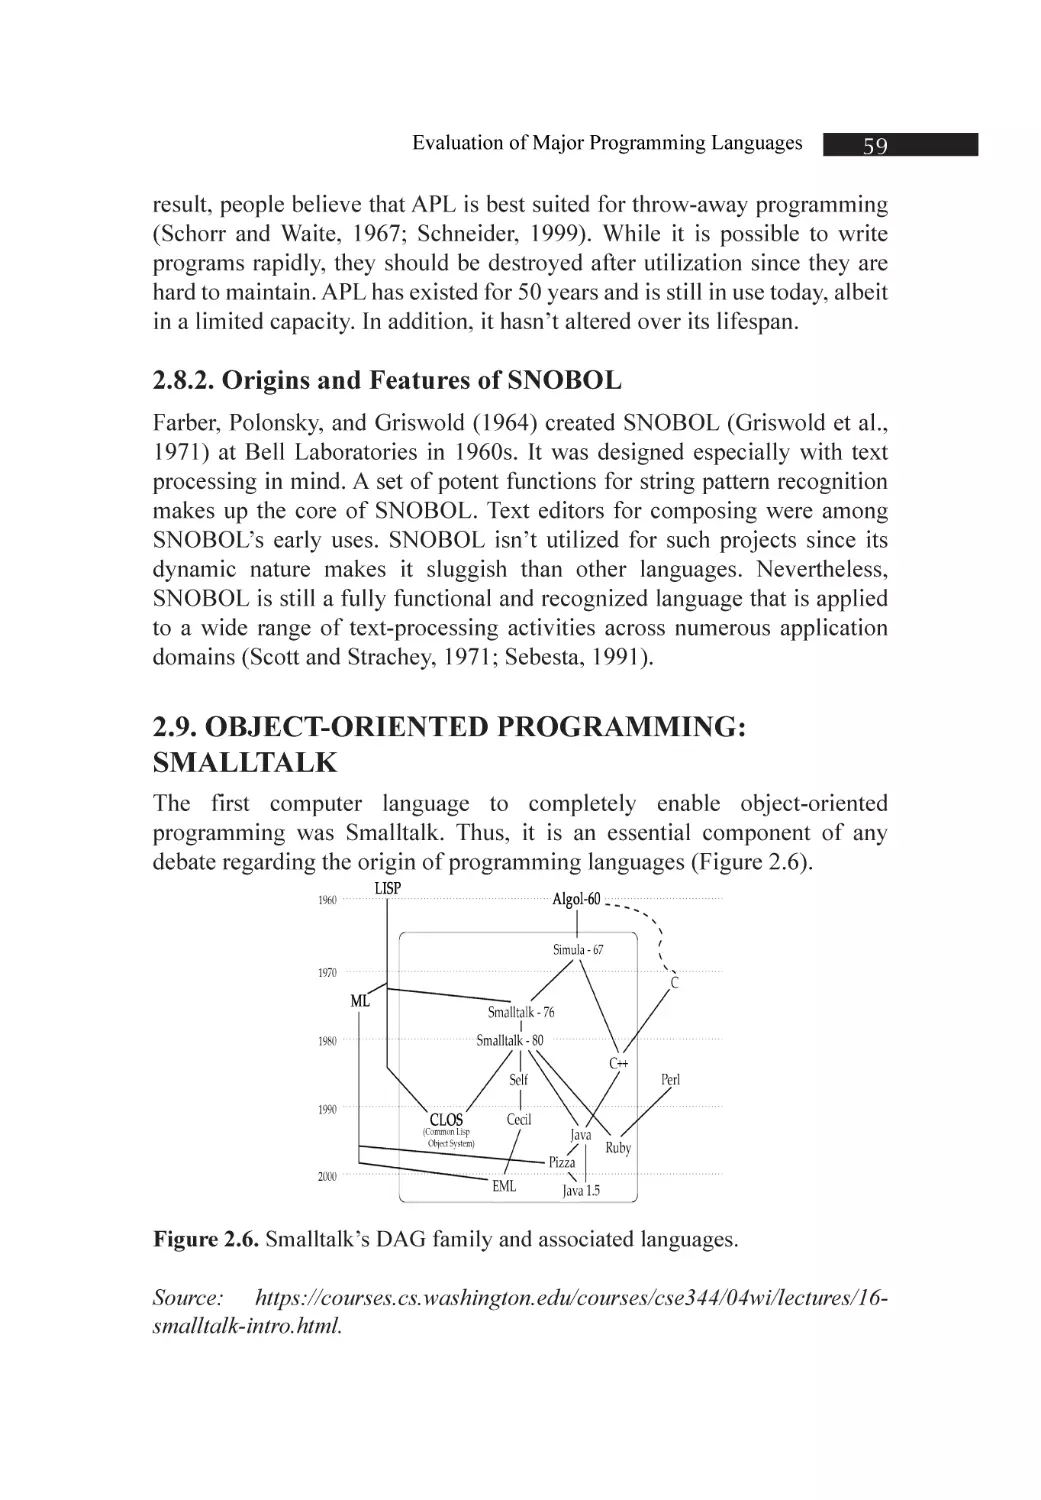 2.9. Object-Oriented Programming